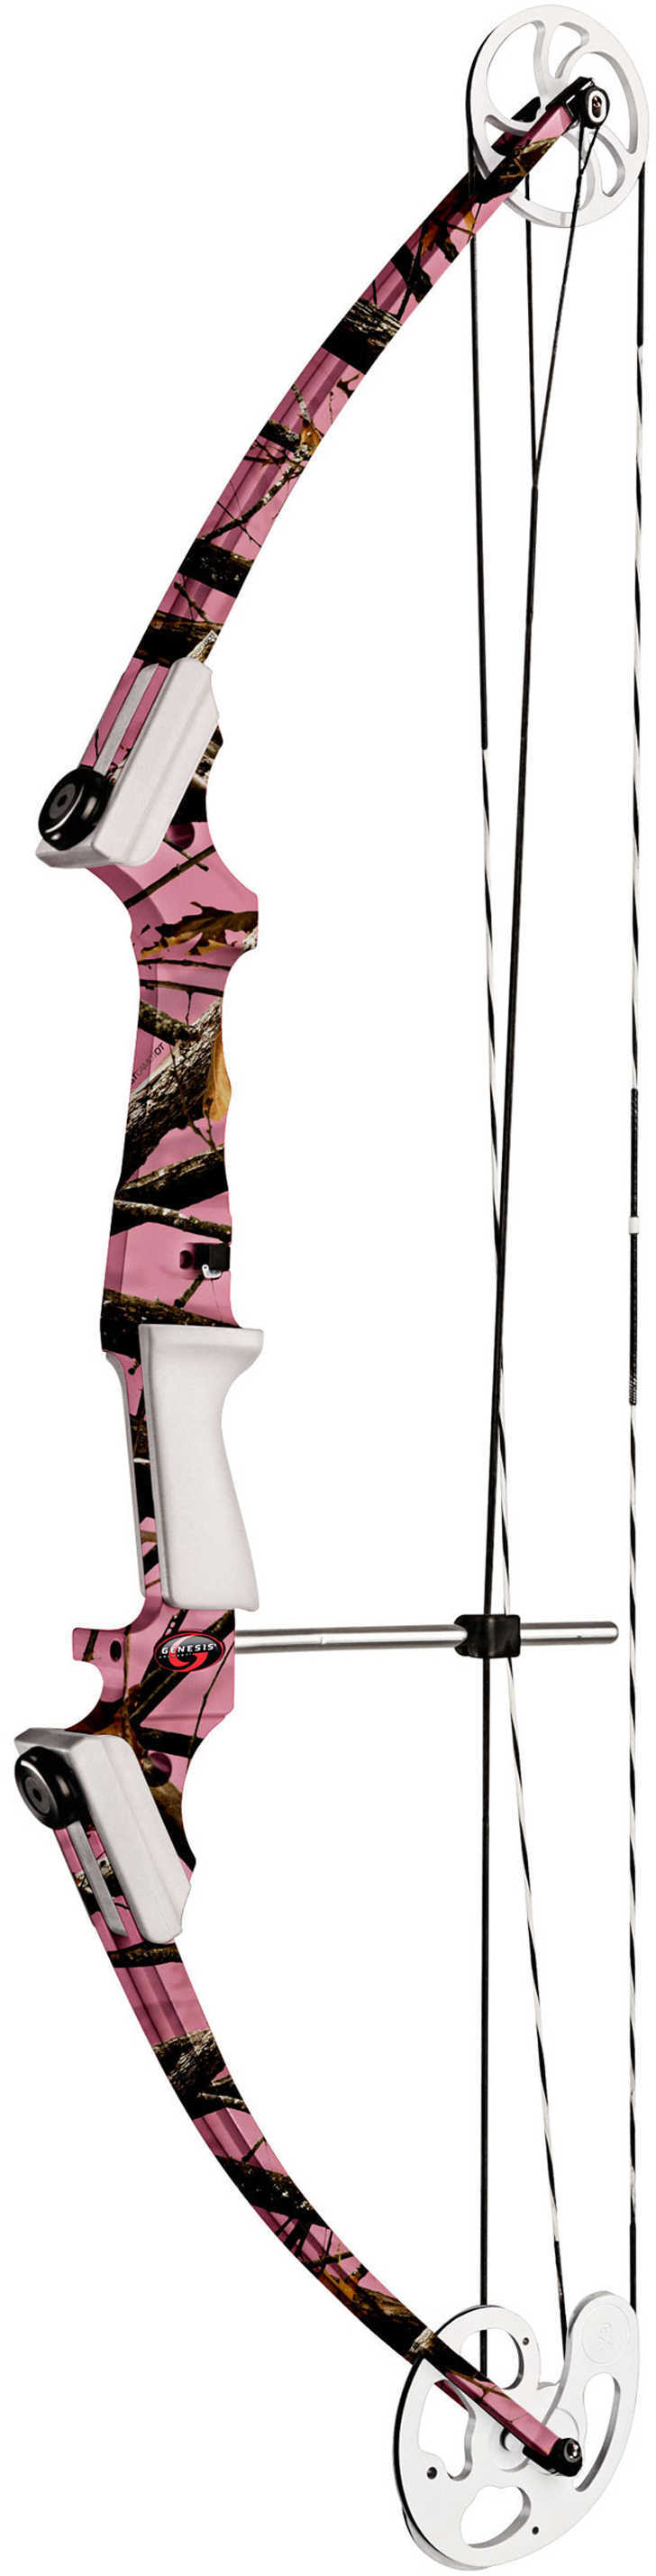 Genesis Original Bow with Kit Right Handed, Pink Camo Md: 12262